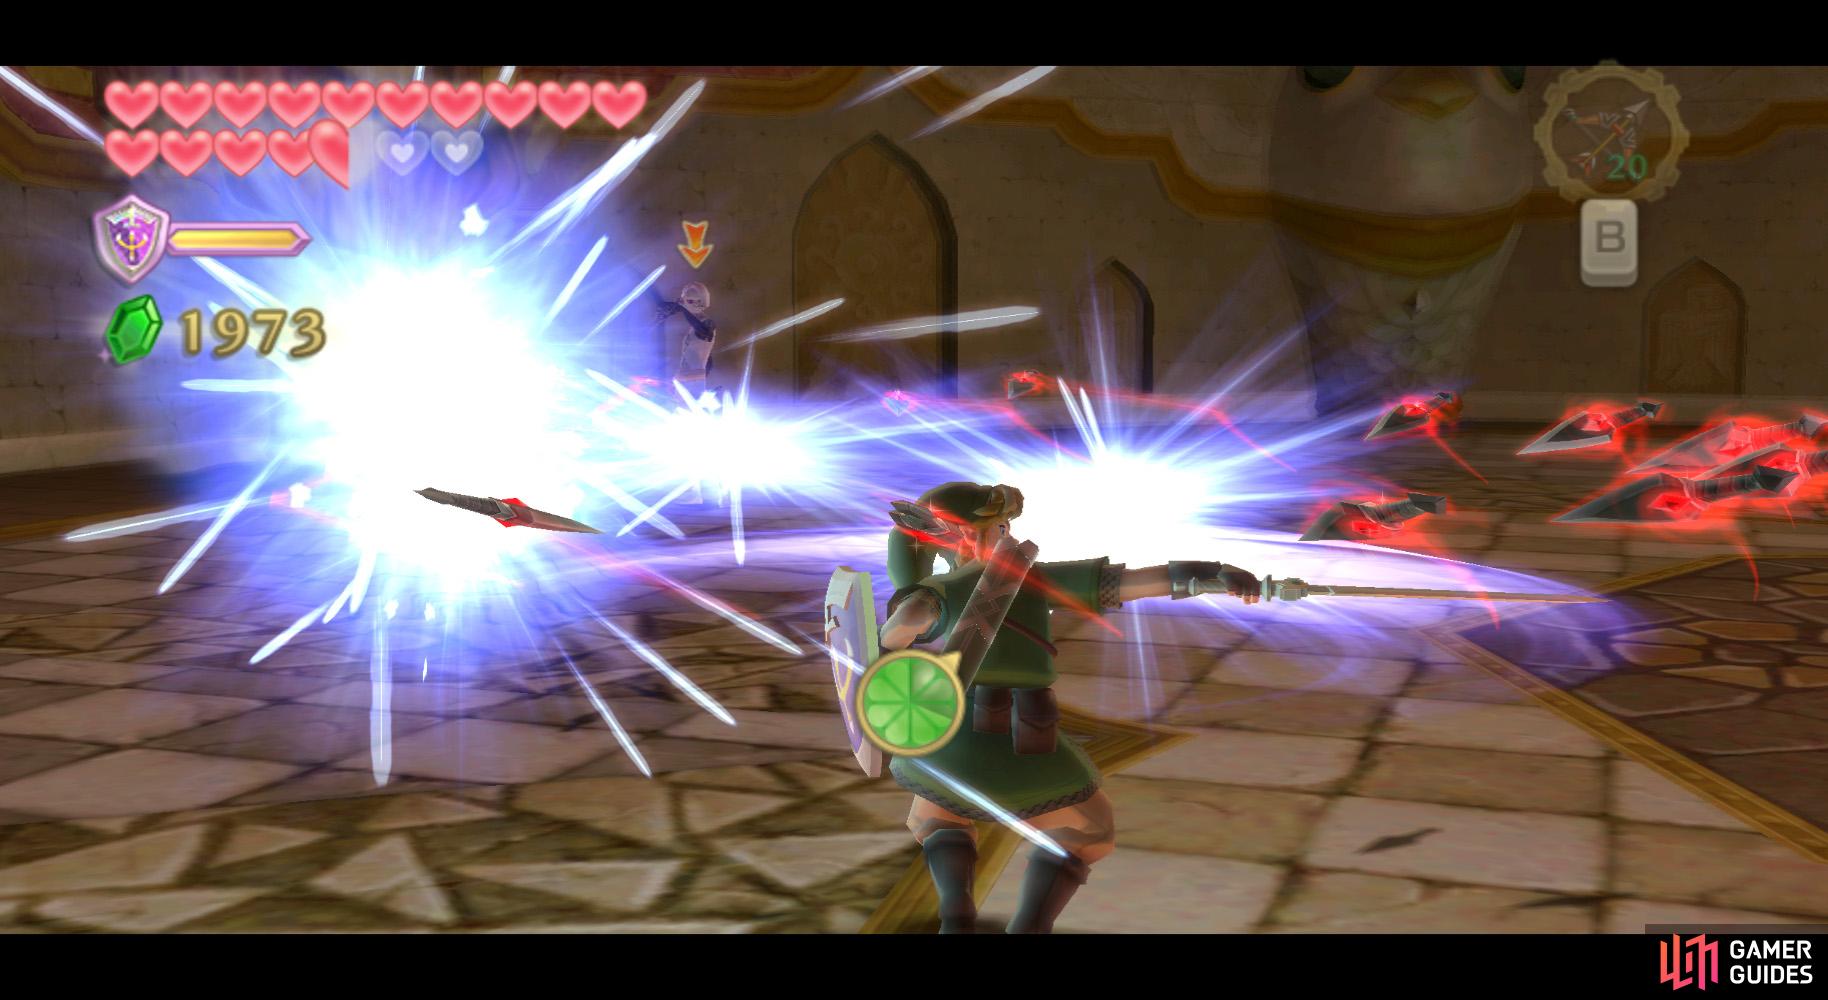 When Link is surrounded by red projectiles, use a horizontal or vertical sword spin.